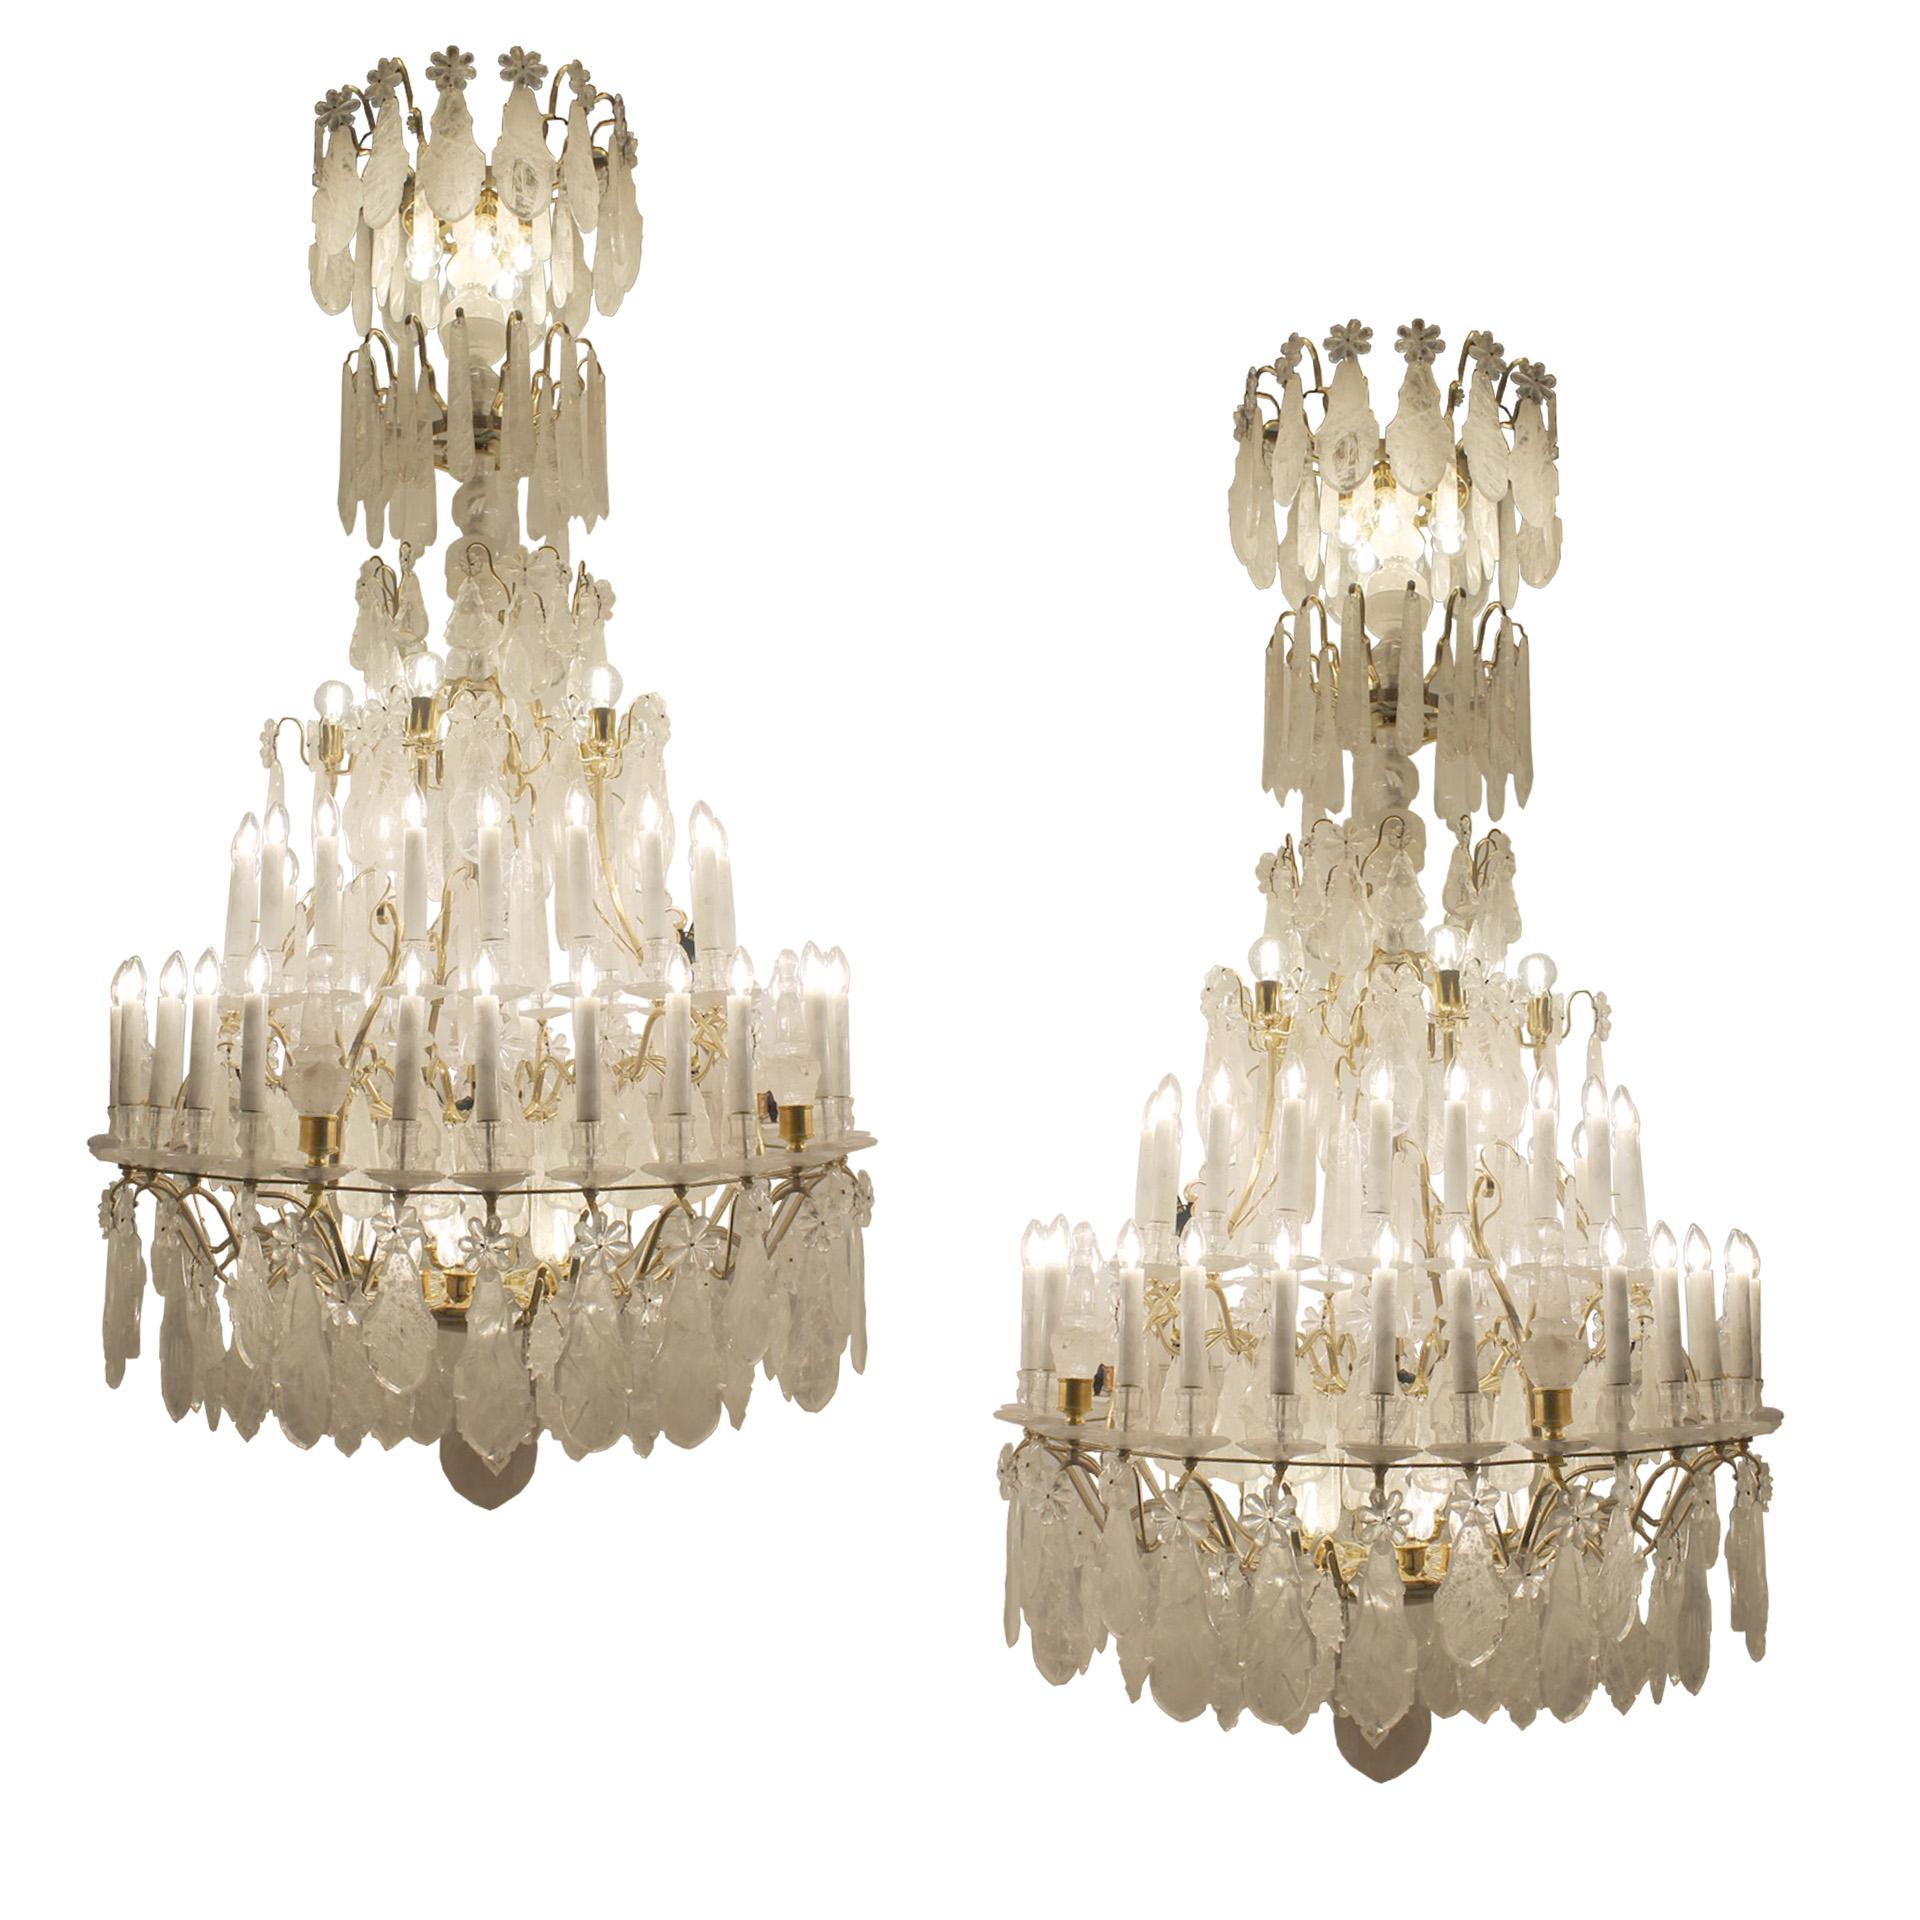 An exceptional pair of rock crystal chandeliers in the classical Louis XV style with unusual dimensions of 2.4m in height, 1.2m diameter. Each chandelier is composed of 45 main lights and 16 pygmy bulbs. All from top quality rock crystal pieces